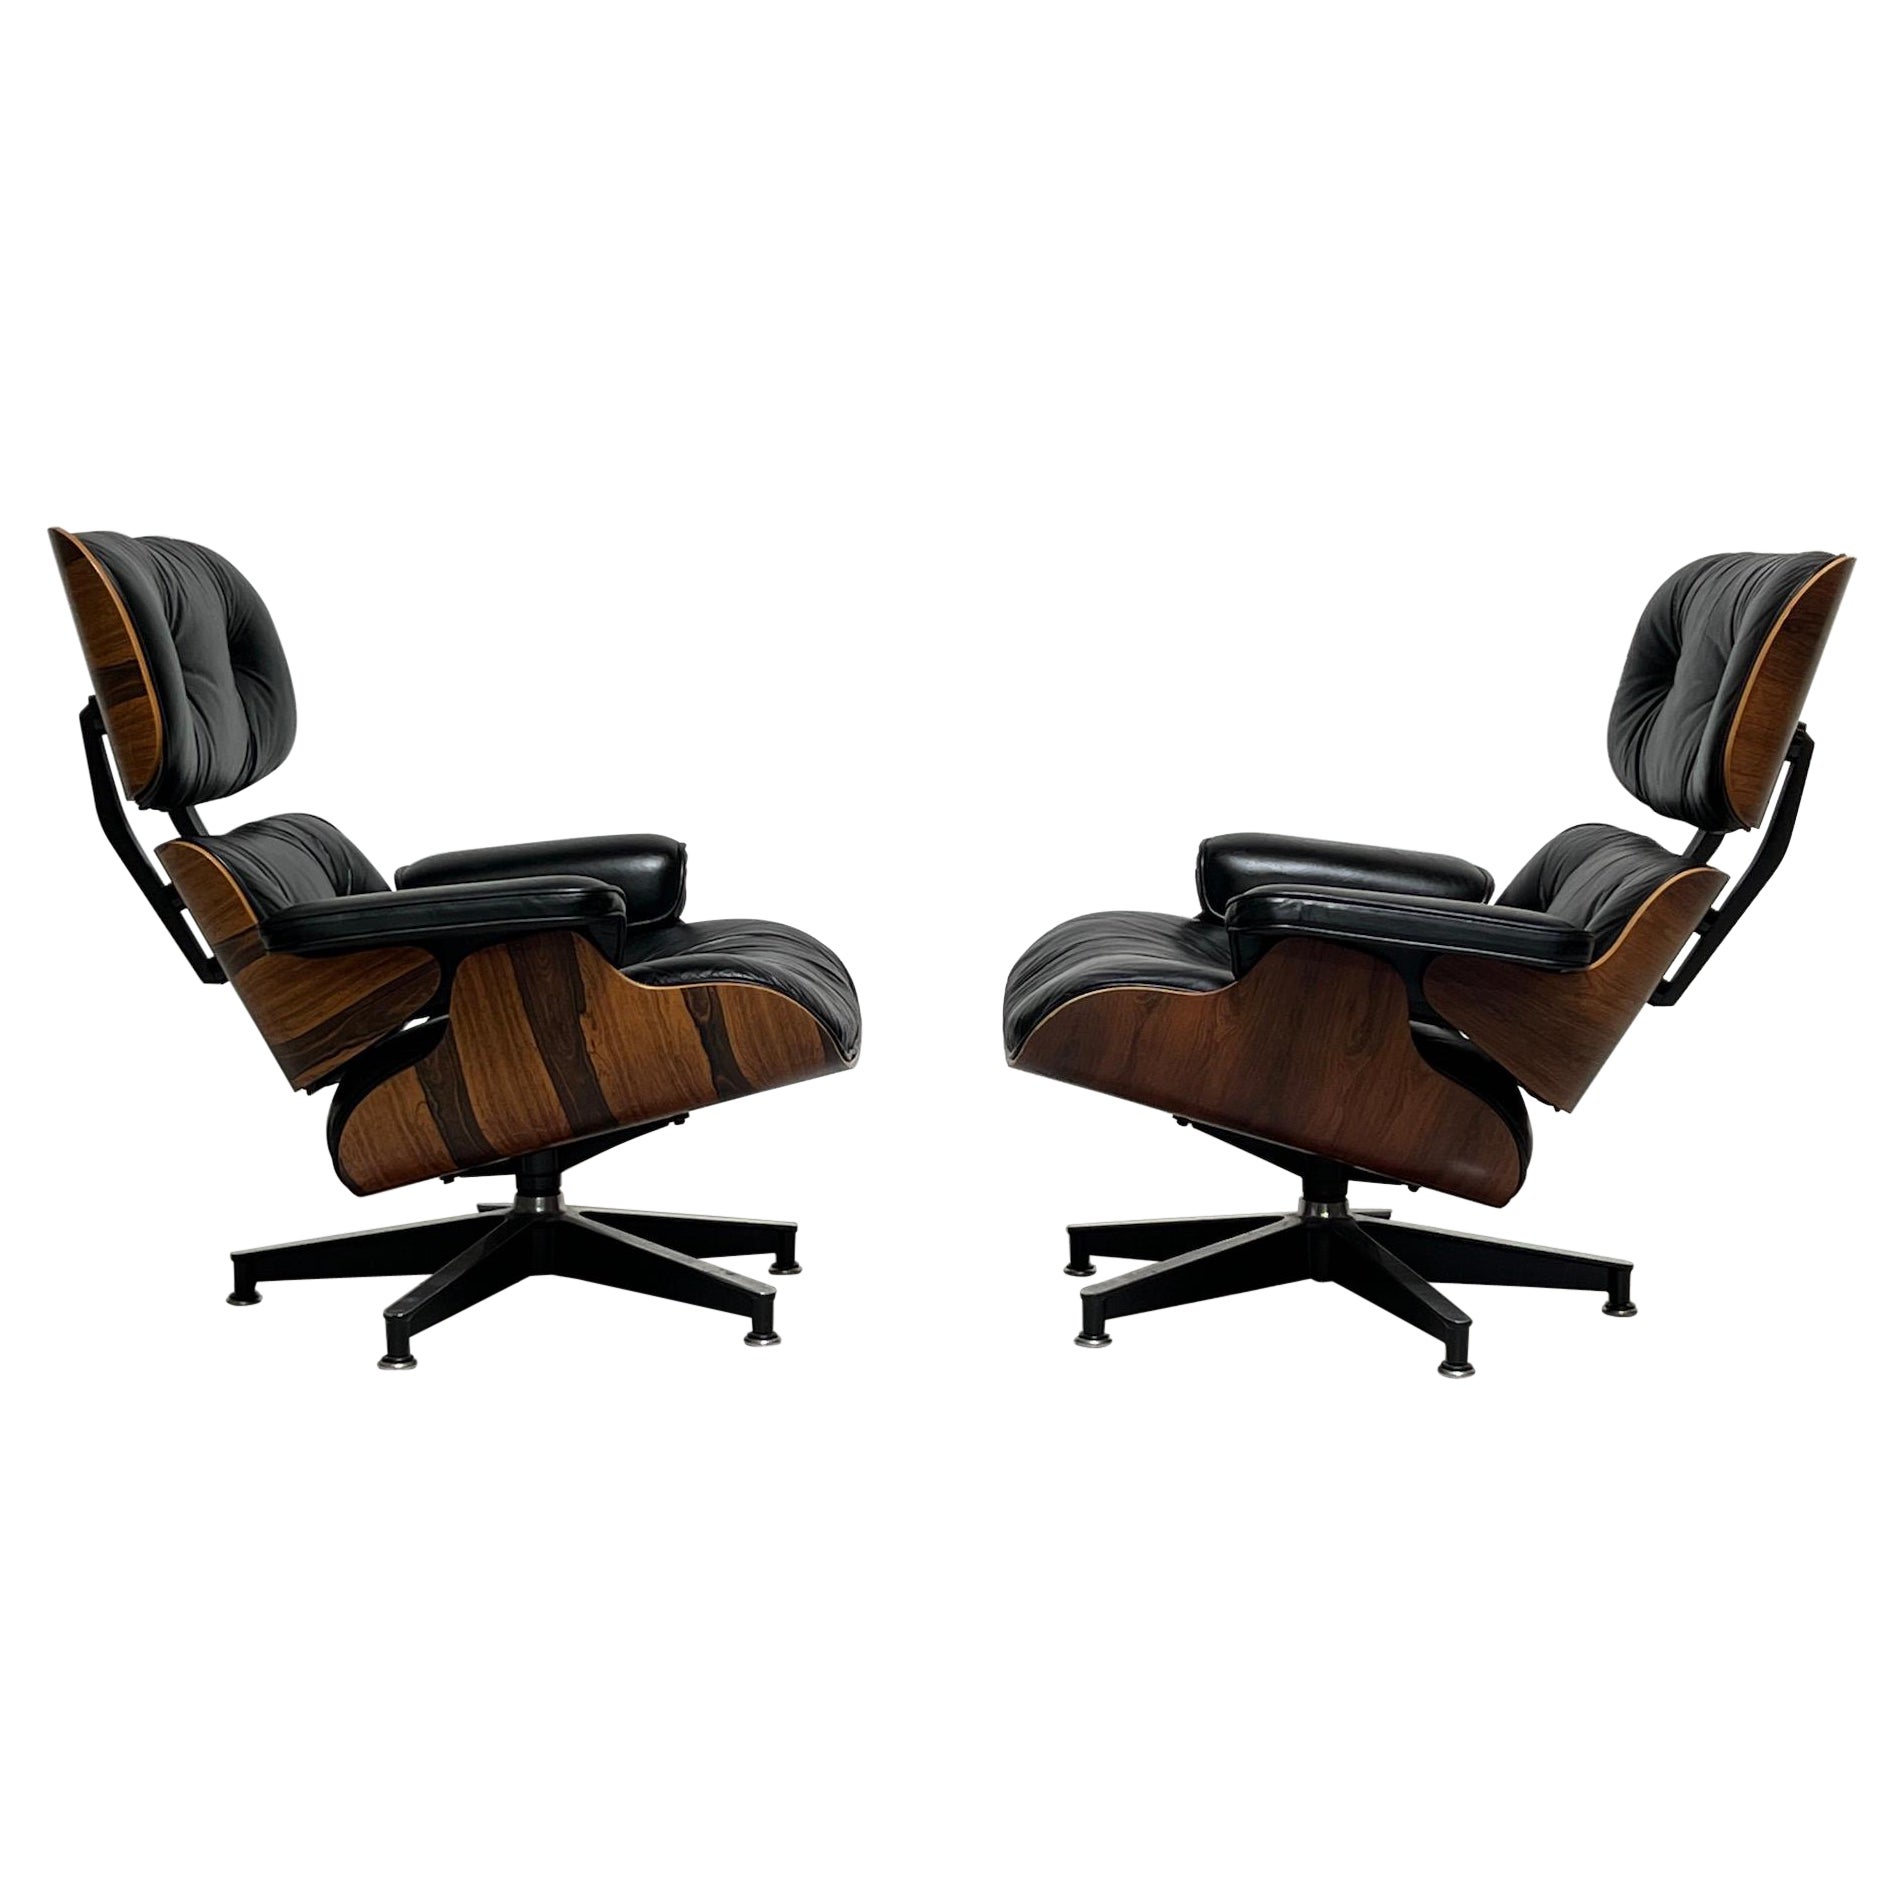 Pair of 670 Lounge Chairs by Charles Eames for Herman Miller For Sale